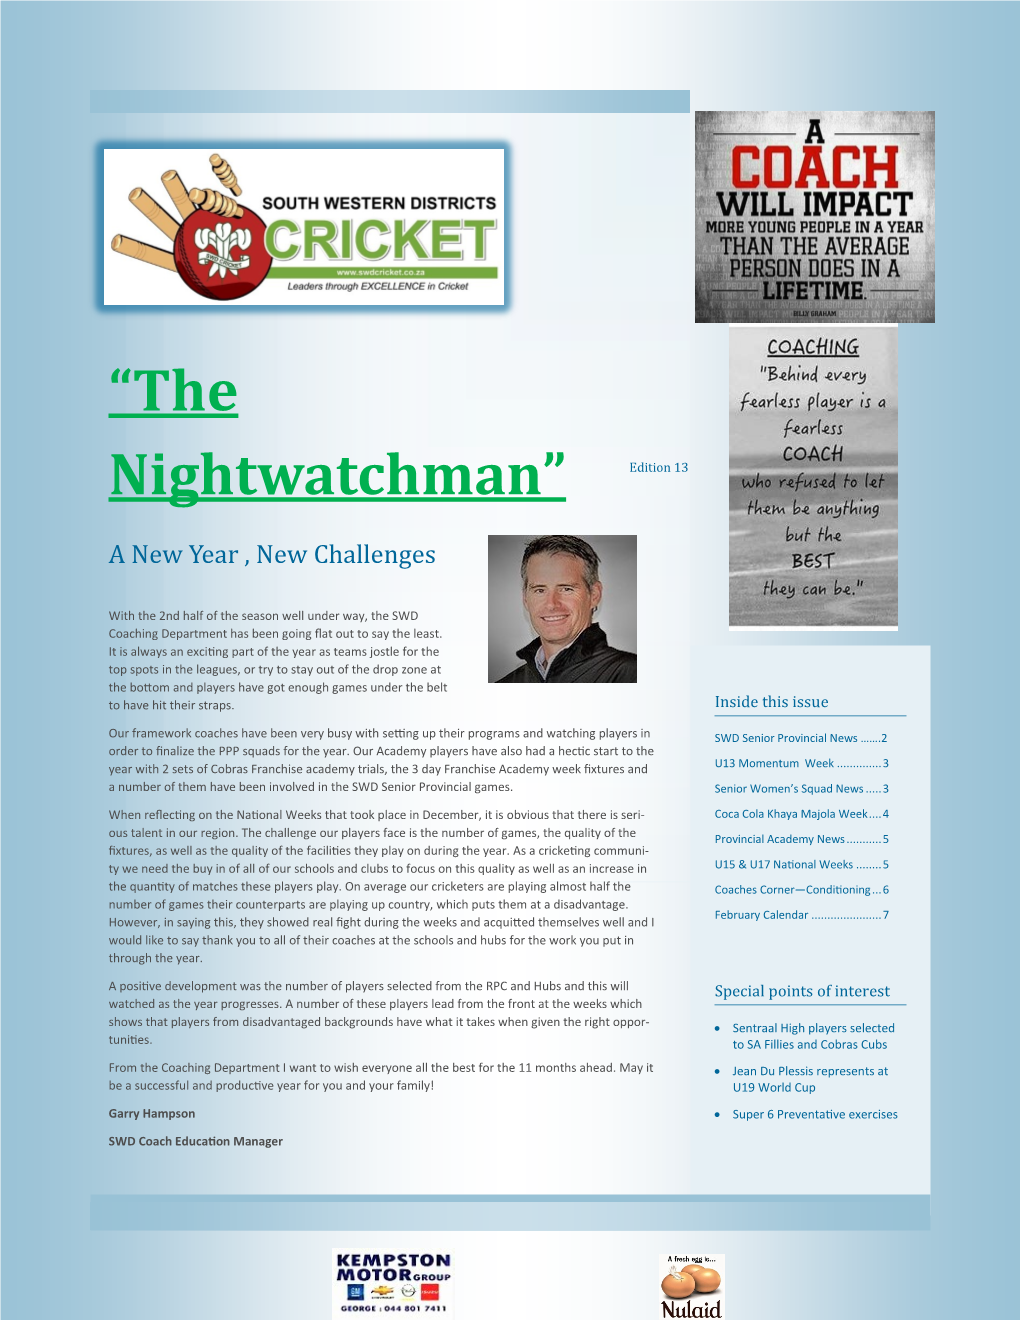 “The Nightwatchman” Edition 13